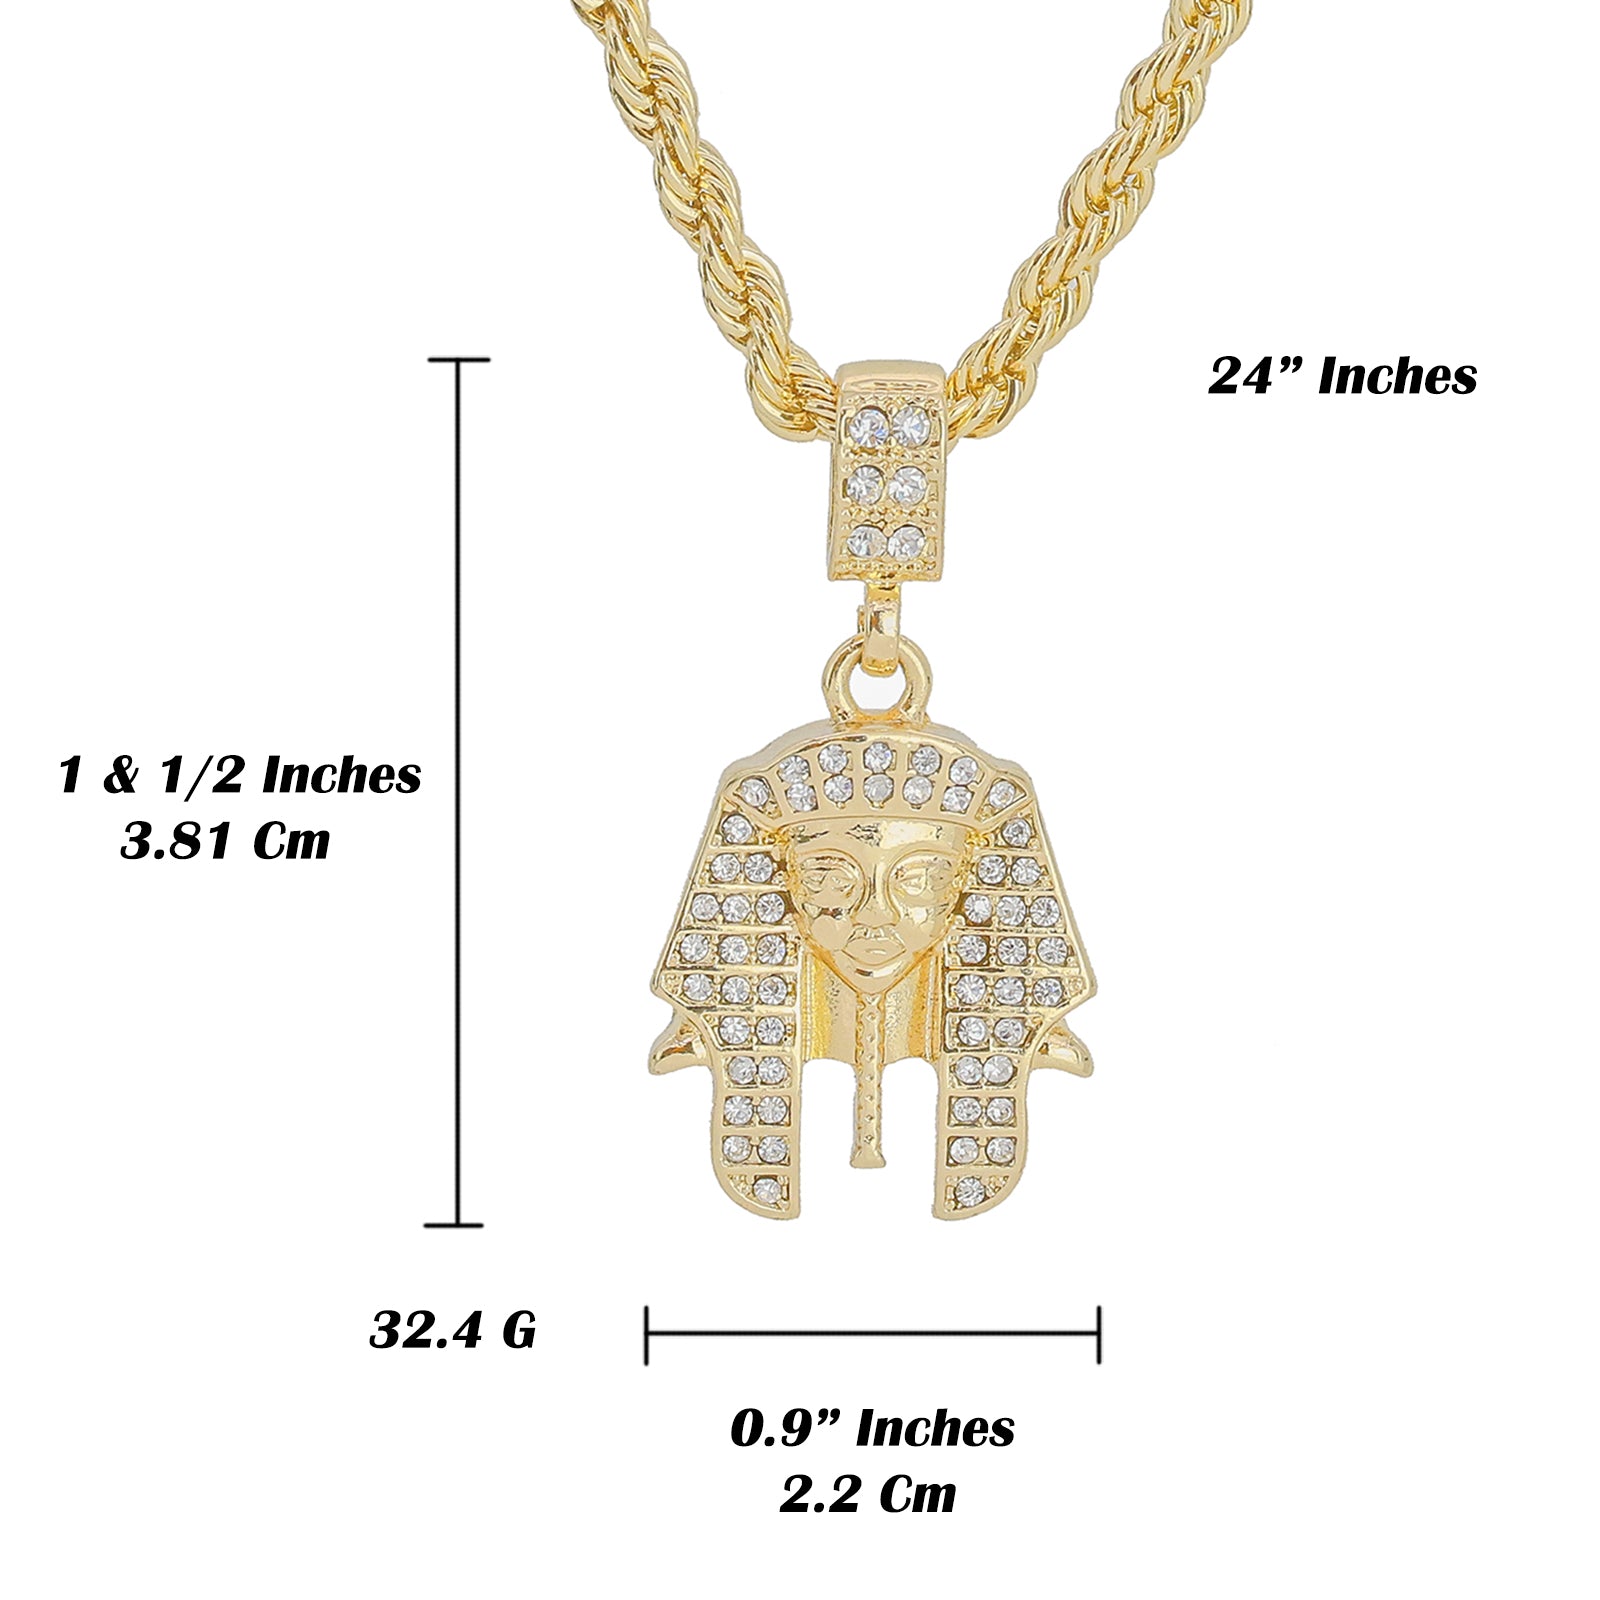 Small Cz Pharaoh Pendant 4mm 24" Rope Chain 18k Gold Plated